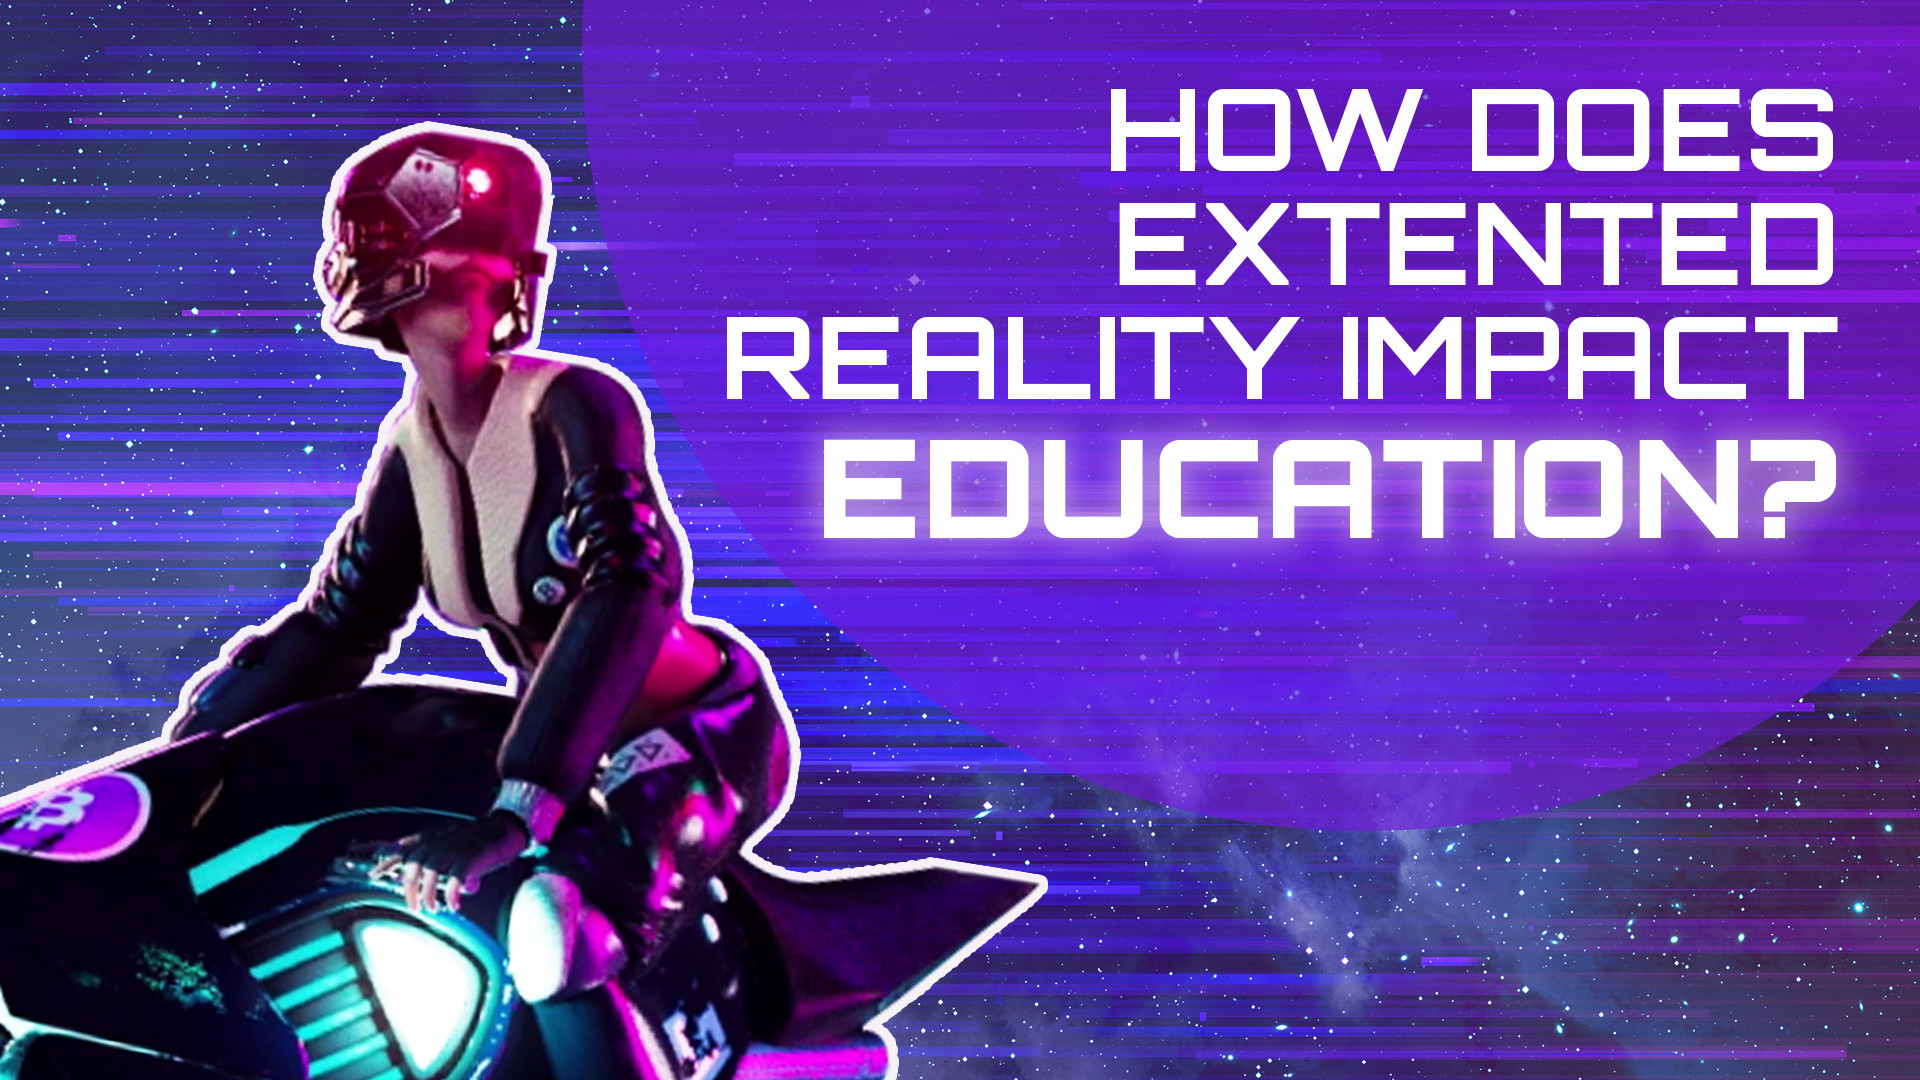 How Does Extended Reality Impact Education? article thumbnail